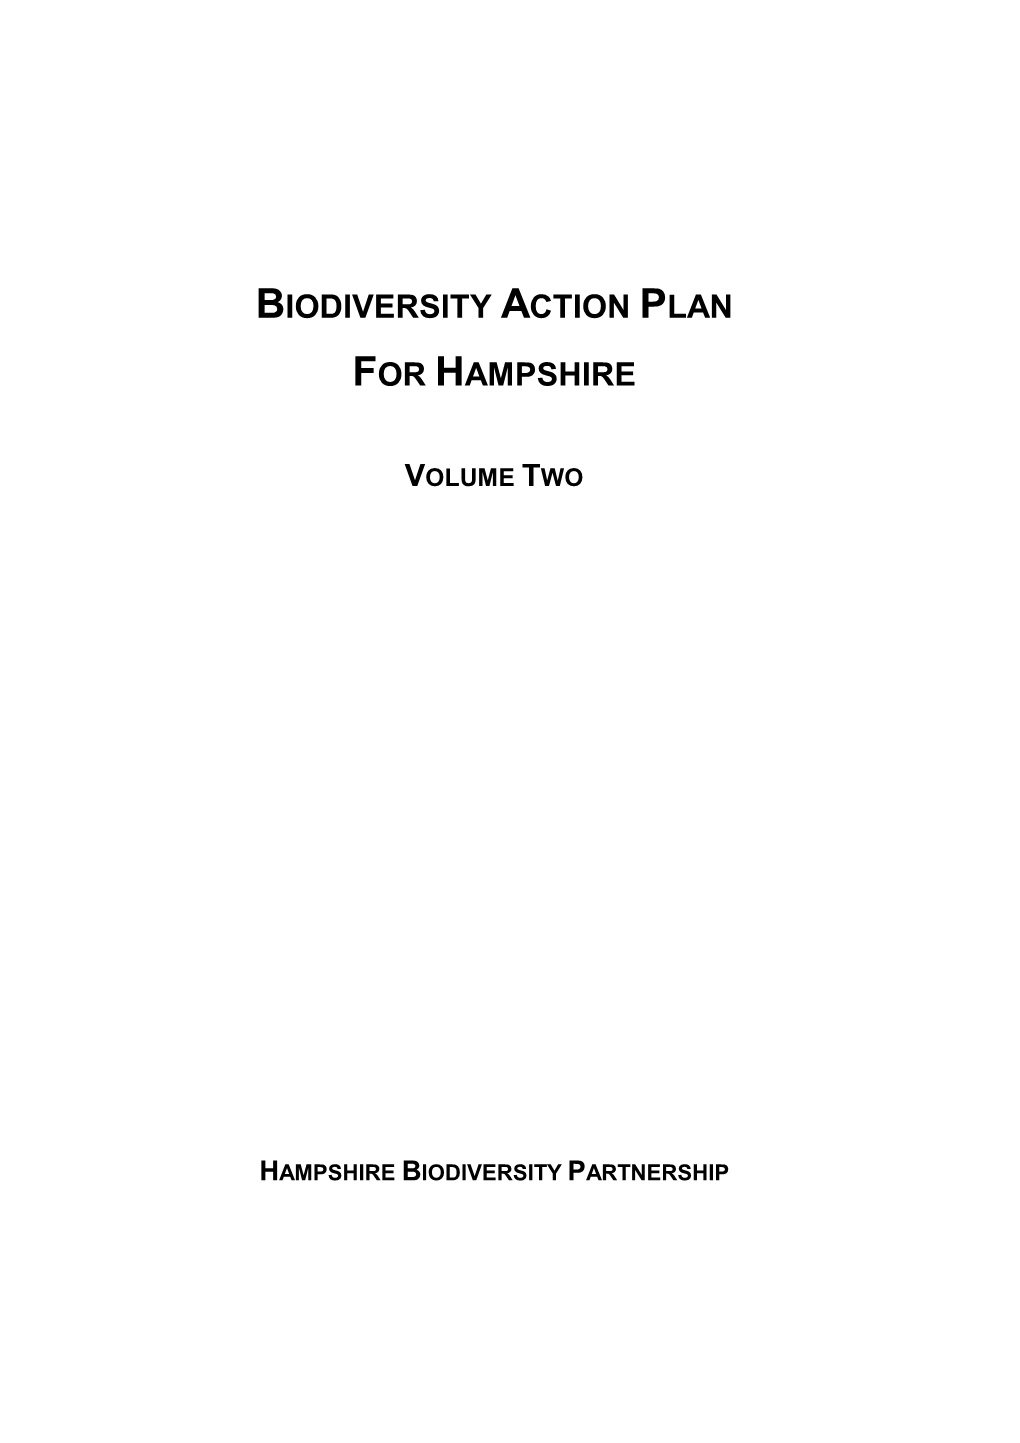 Biodiversity Action Plan for Hampshire